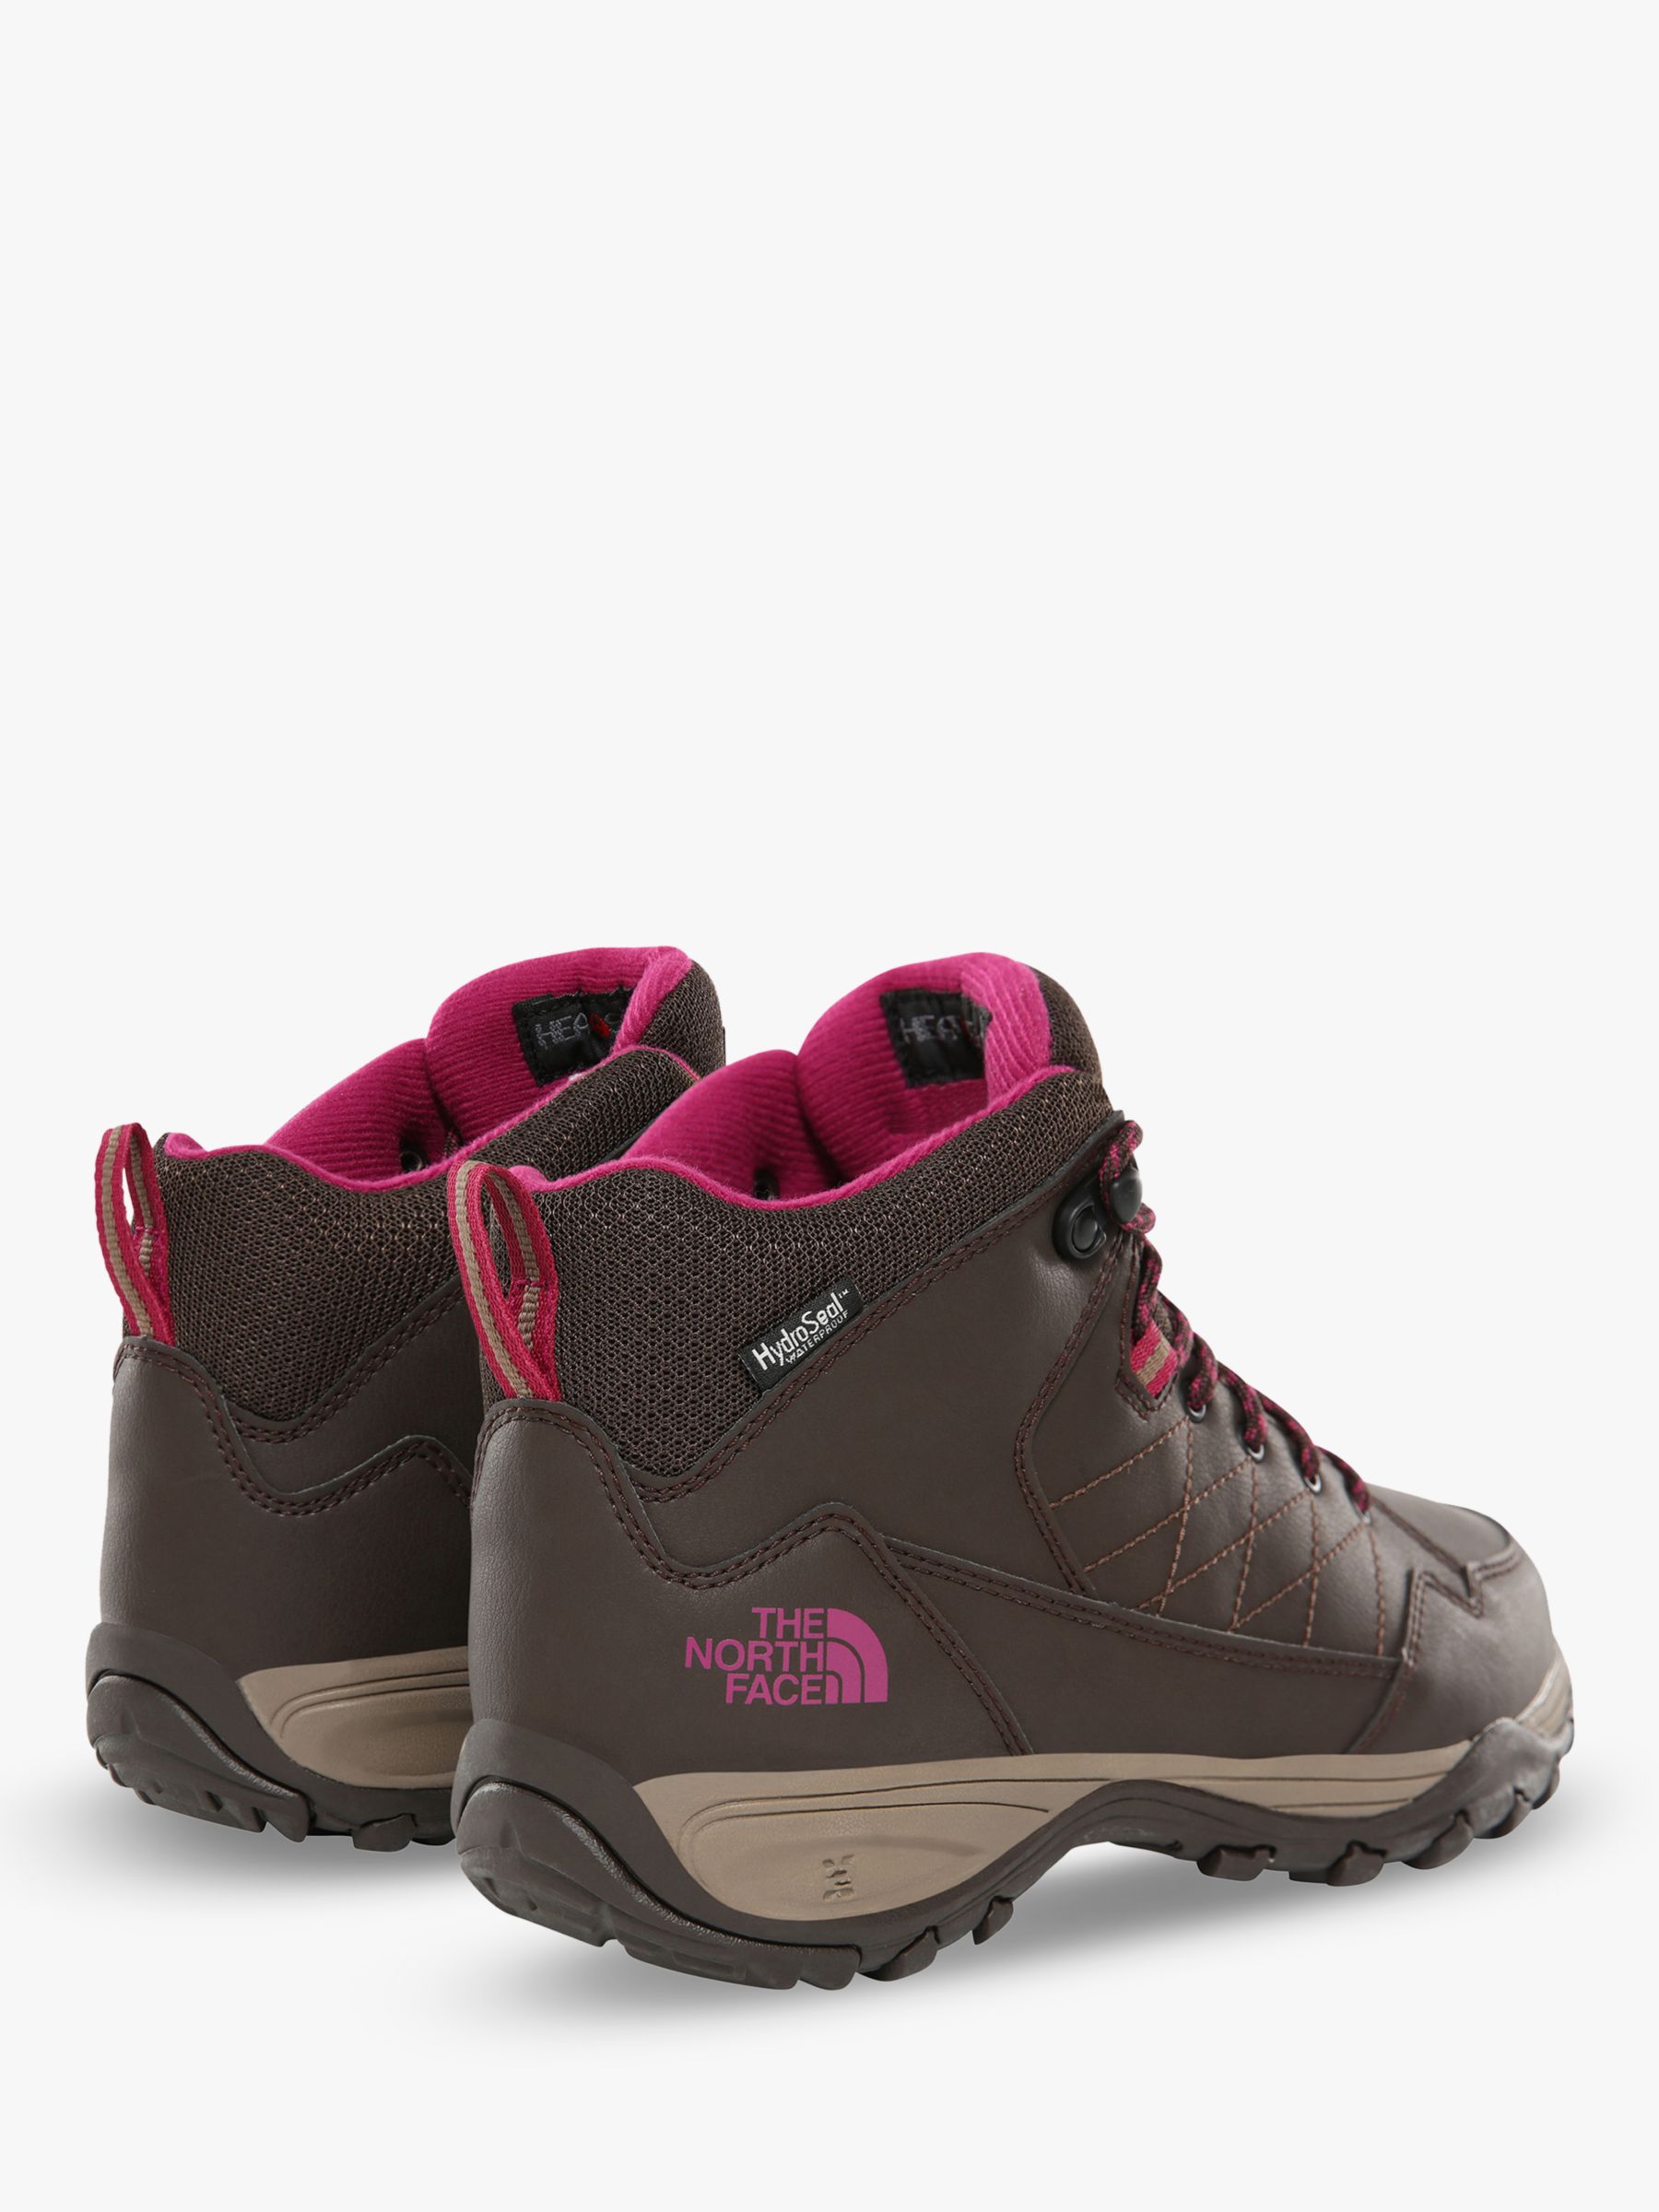 north face waterproof walking boots